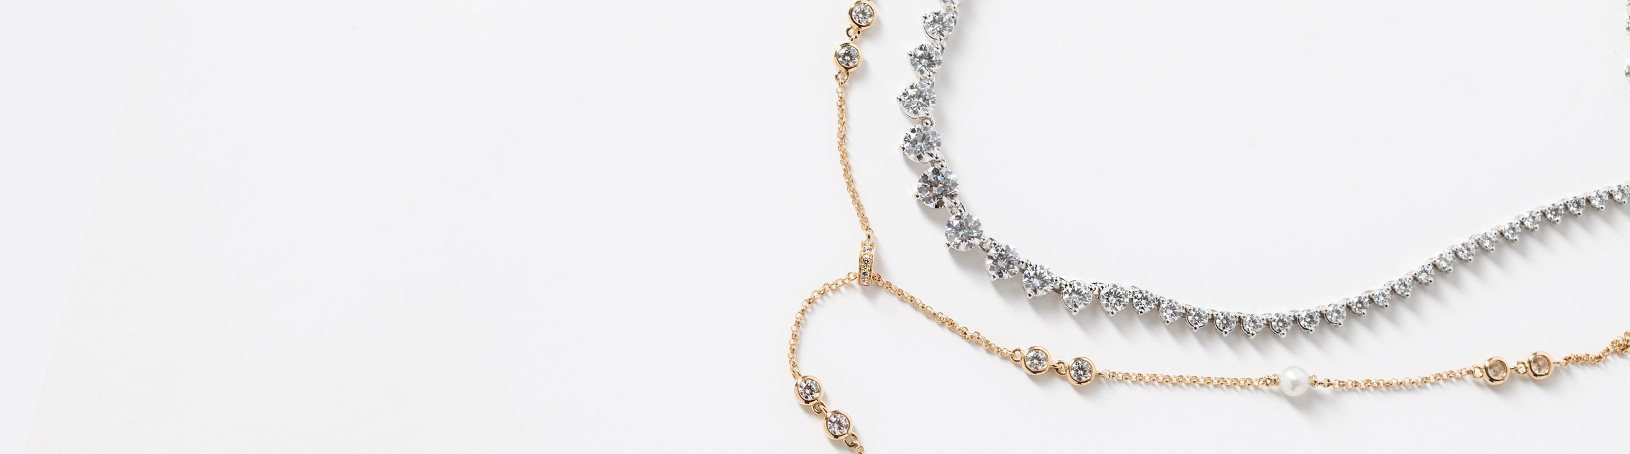 A yellow gold and a white gold necklace side by side